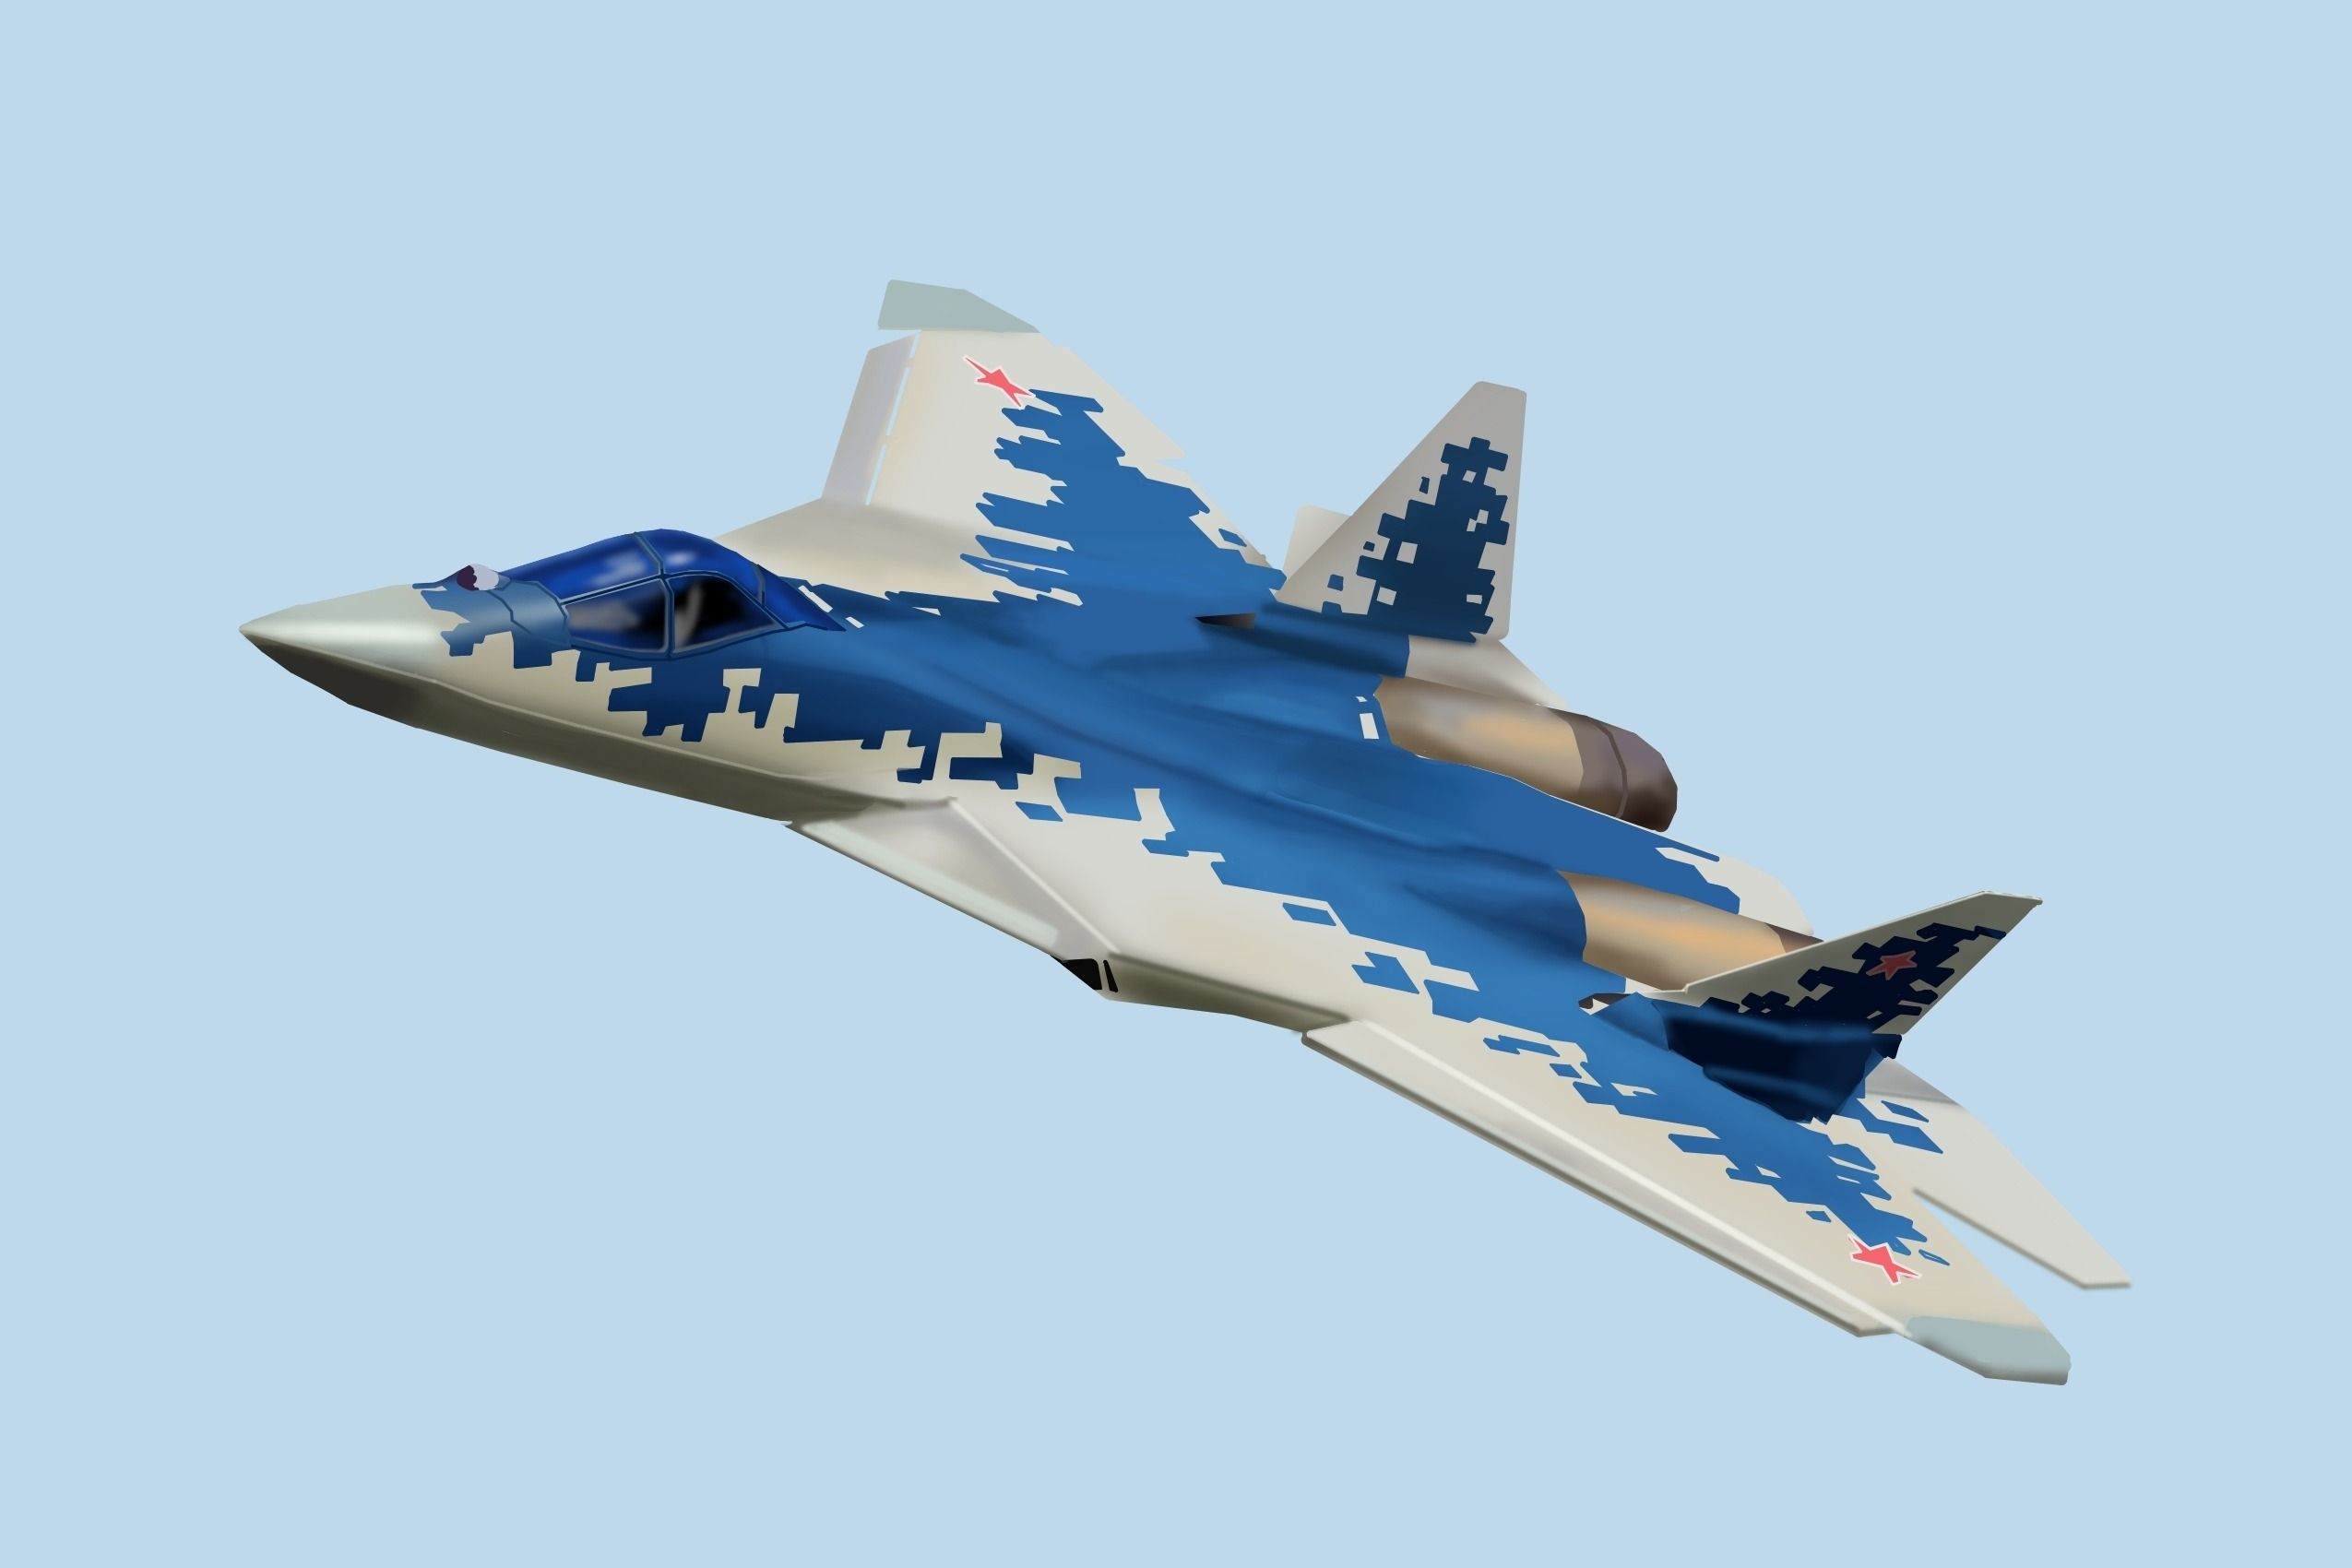 A Sukhoi Su 57 Flying in the sky.